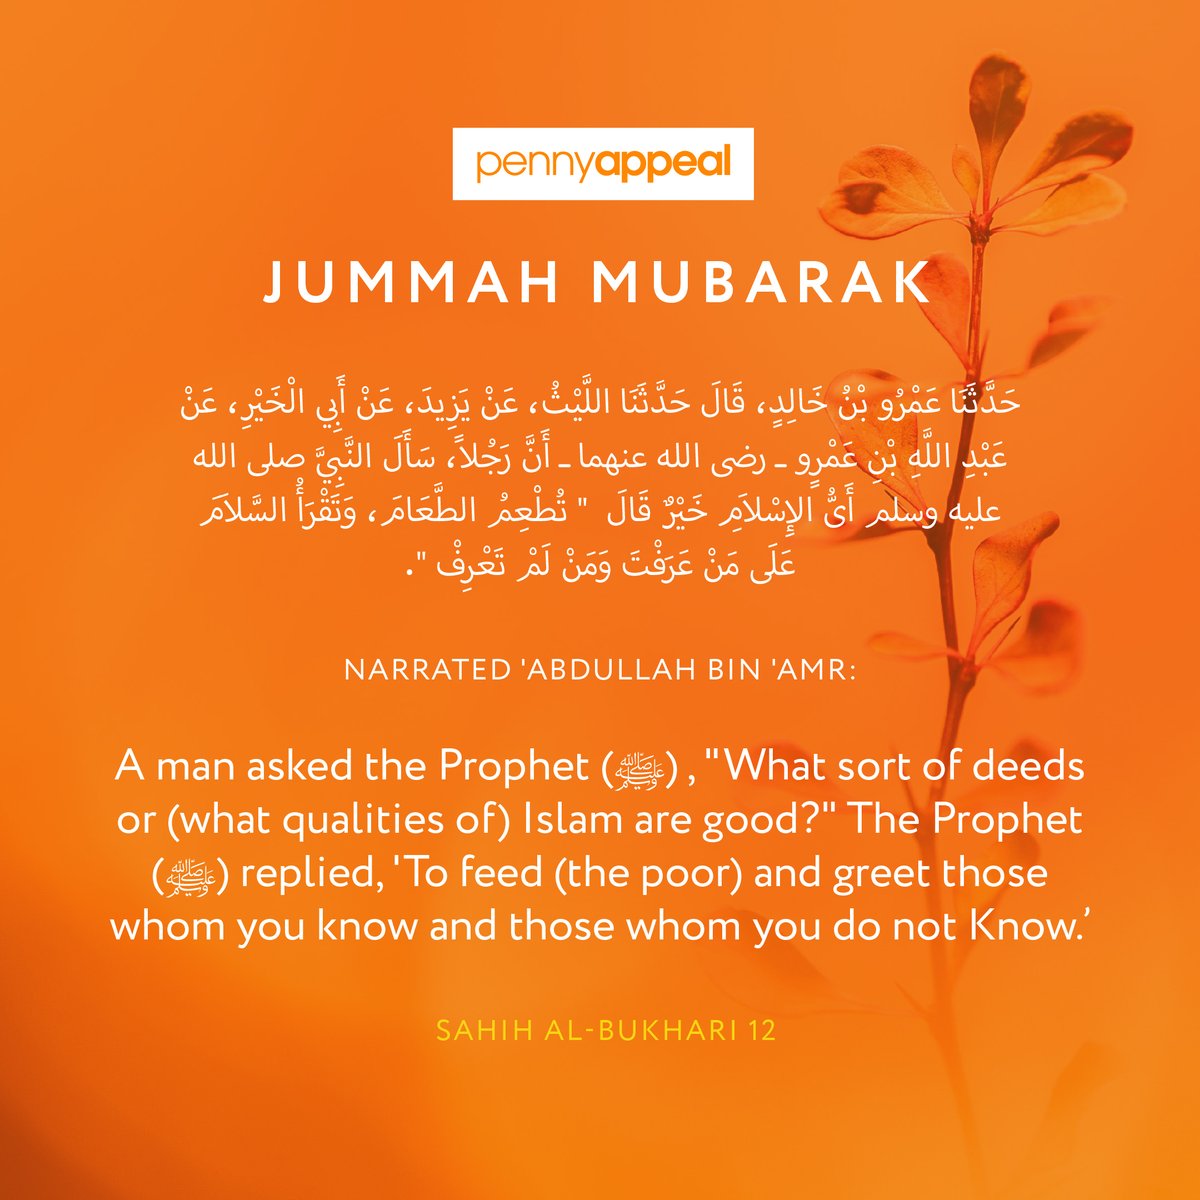 Jummah Mubarak. 🤲 On this blessed Friday, let us be reminded of our duty to feed our brothers and sisters who are facing adversity, and to treat all with respect whether we know them or not. Give the precious gift of food for £50 today: pennyappeal.org/appeal/feed-ou… #Jummah #Islam